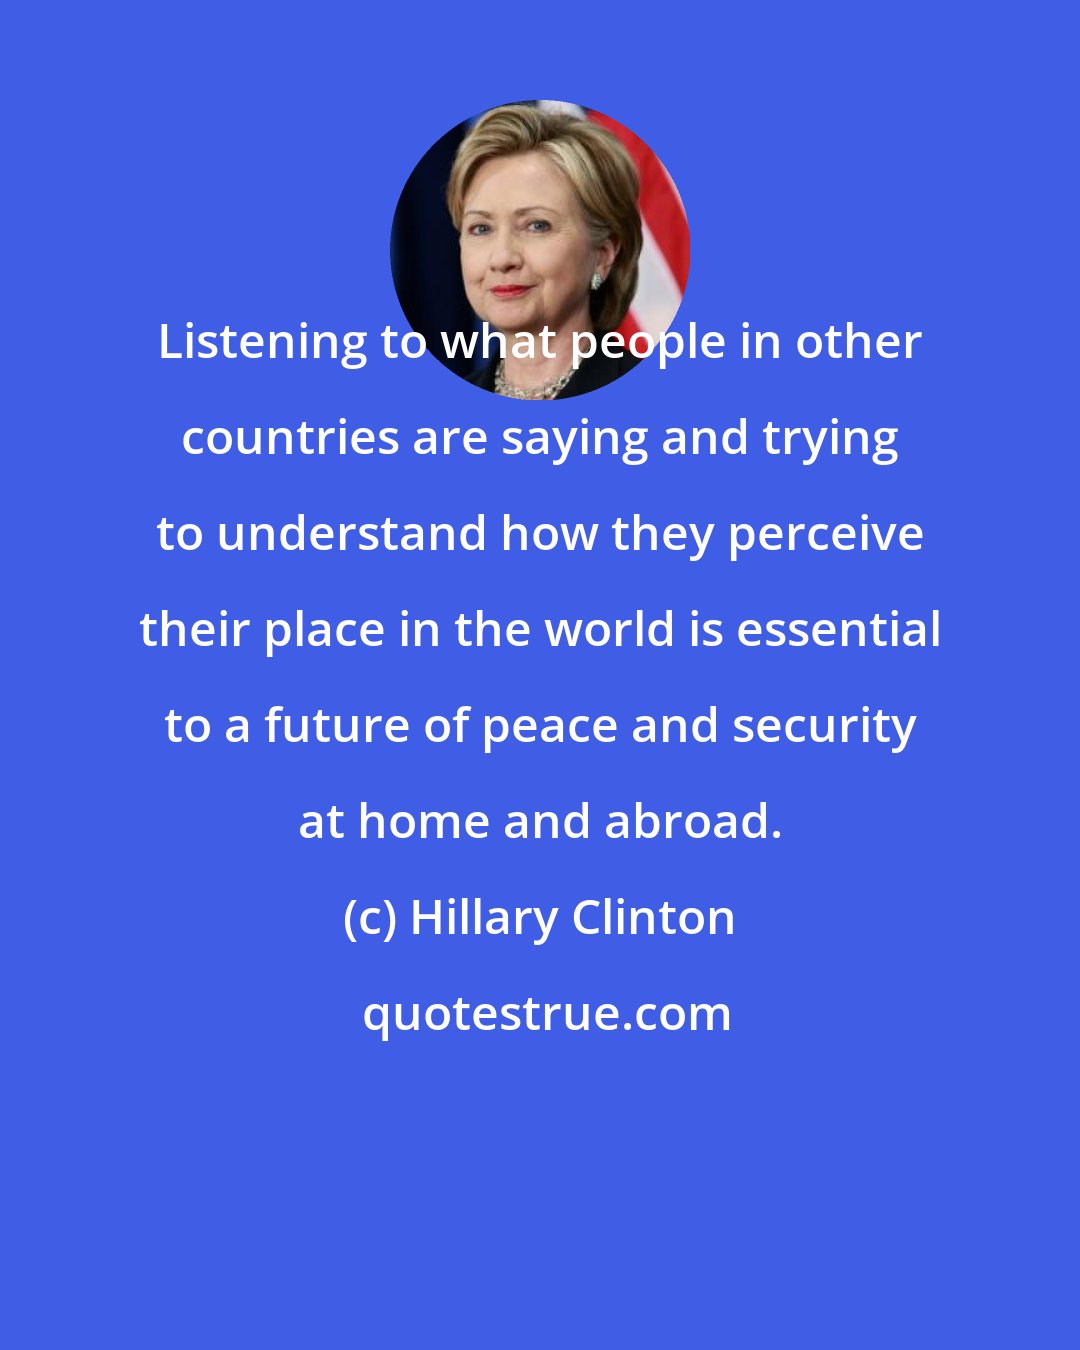 Hillary Clinton: Listening to what people in other countries are saying and trying to understand how they perceive their place in the world is essential to a future of peace and security at home and abroad.